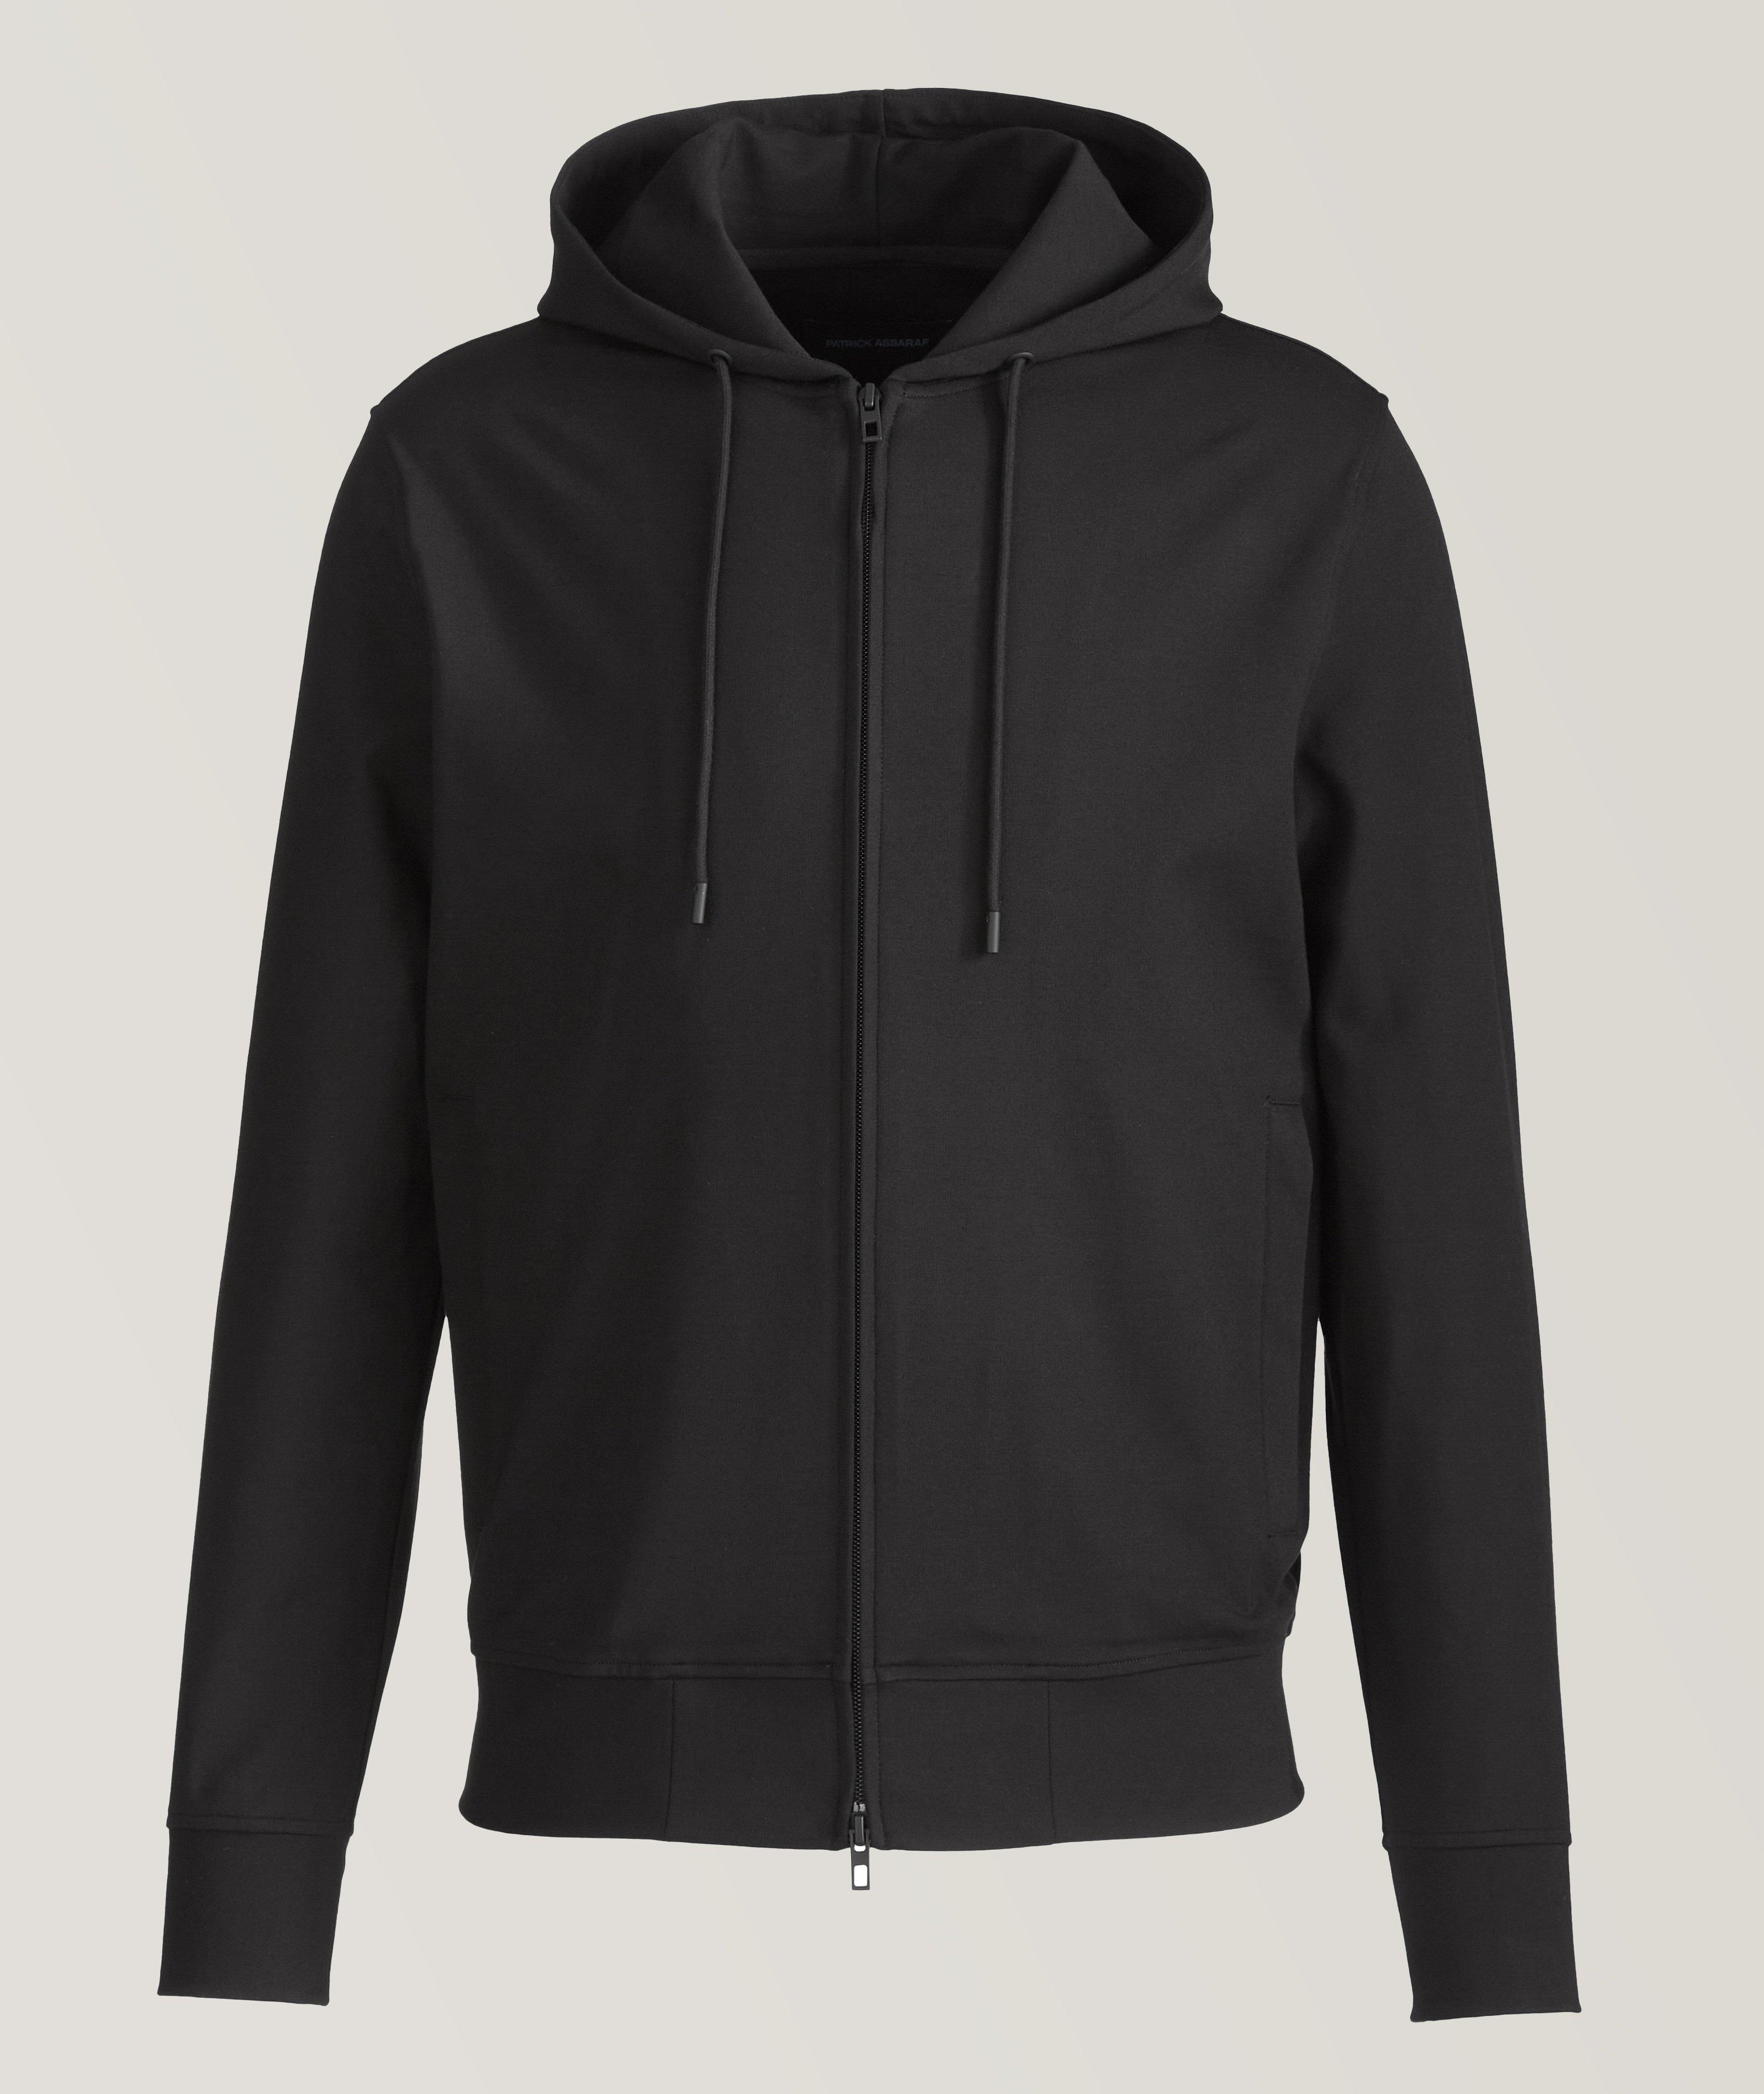 Viscose-Blend Technical Full-Zip Hooded Sweater image 0